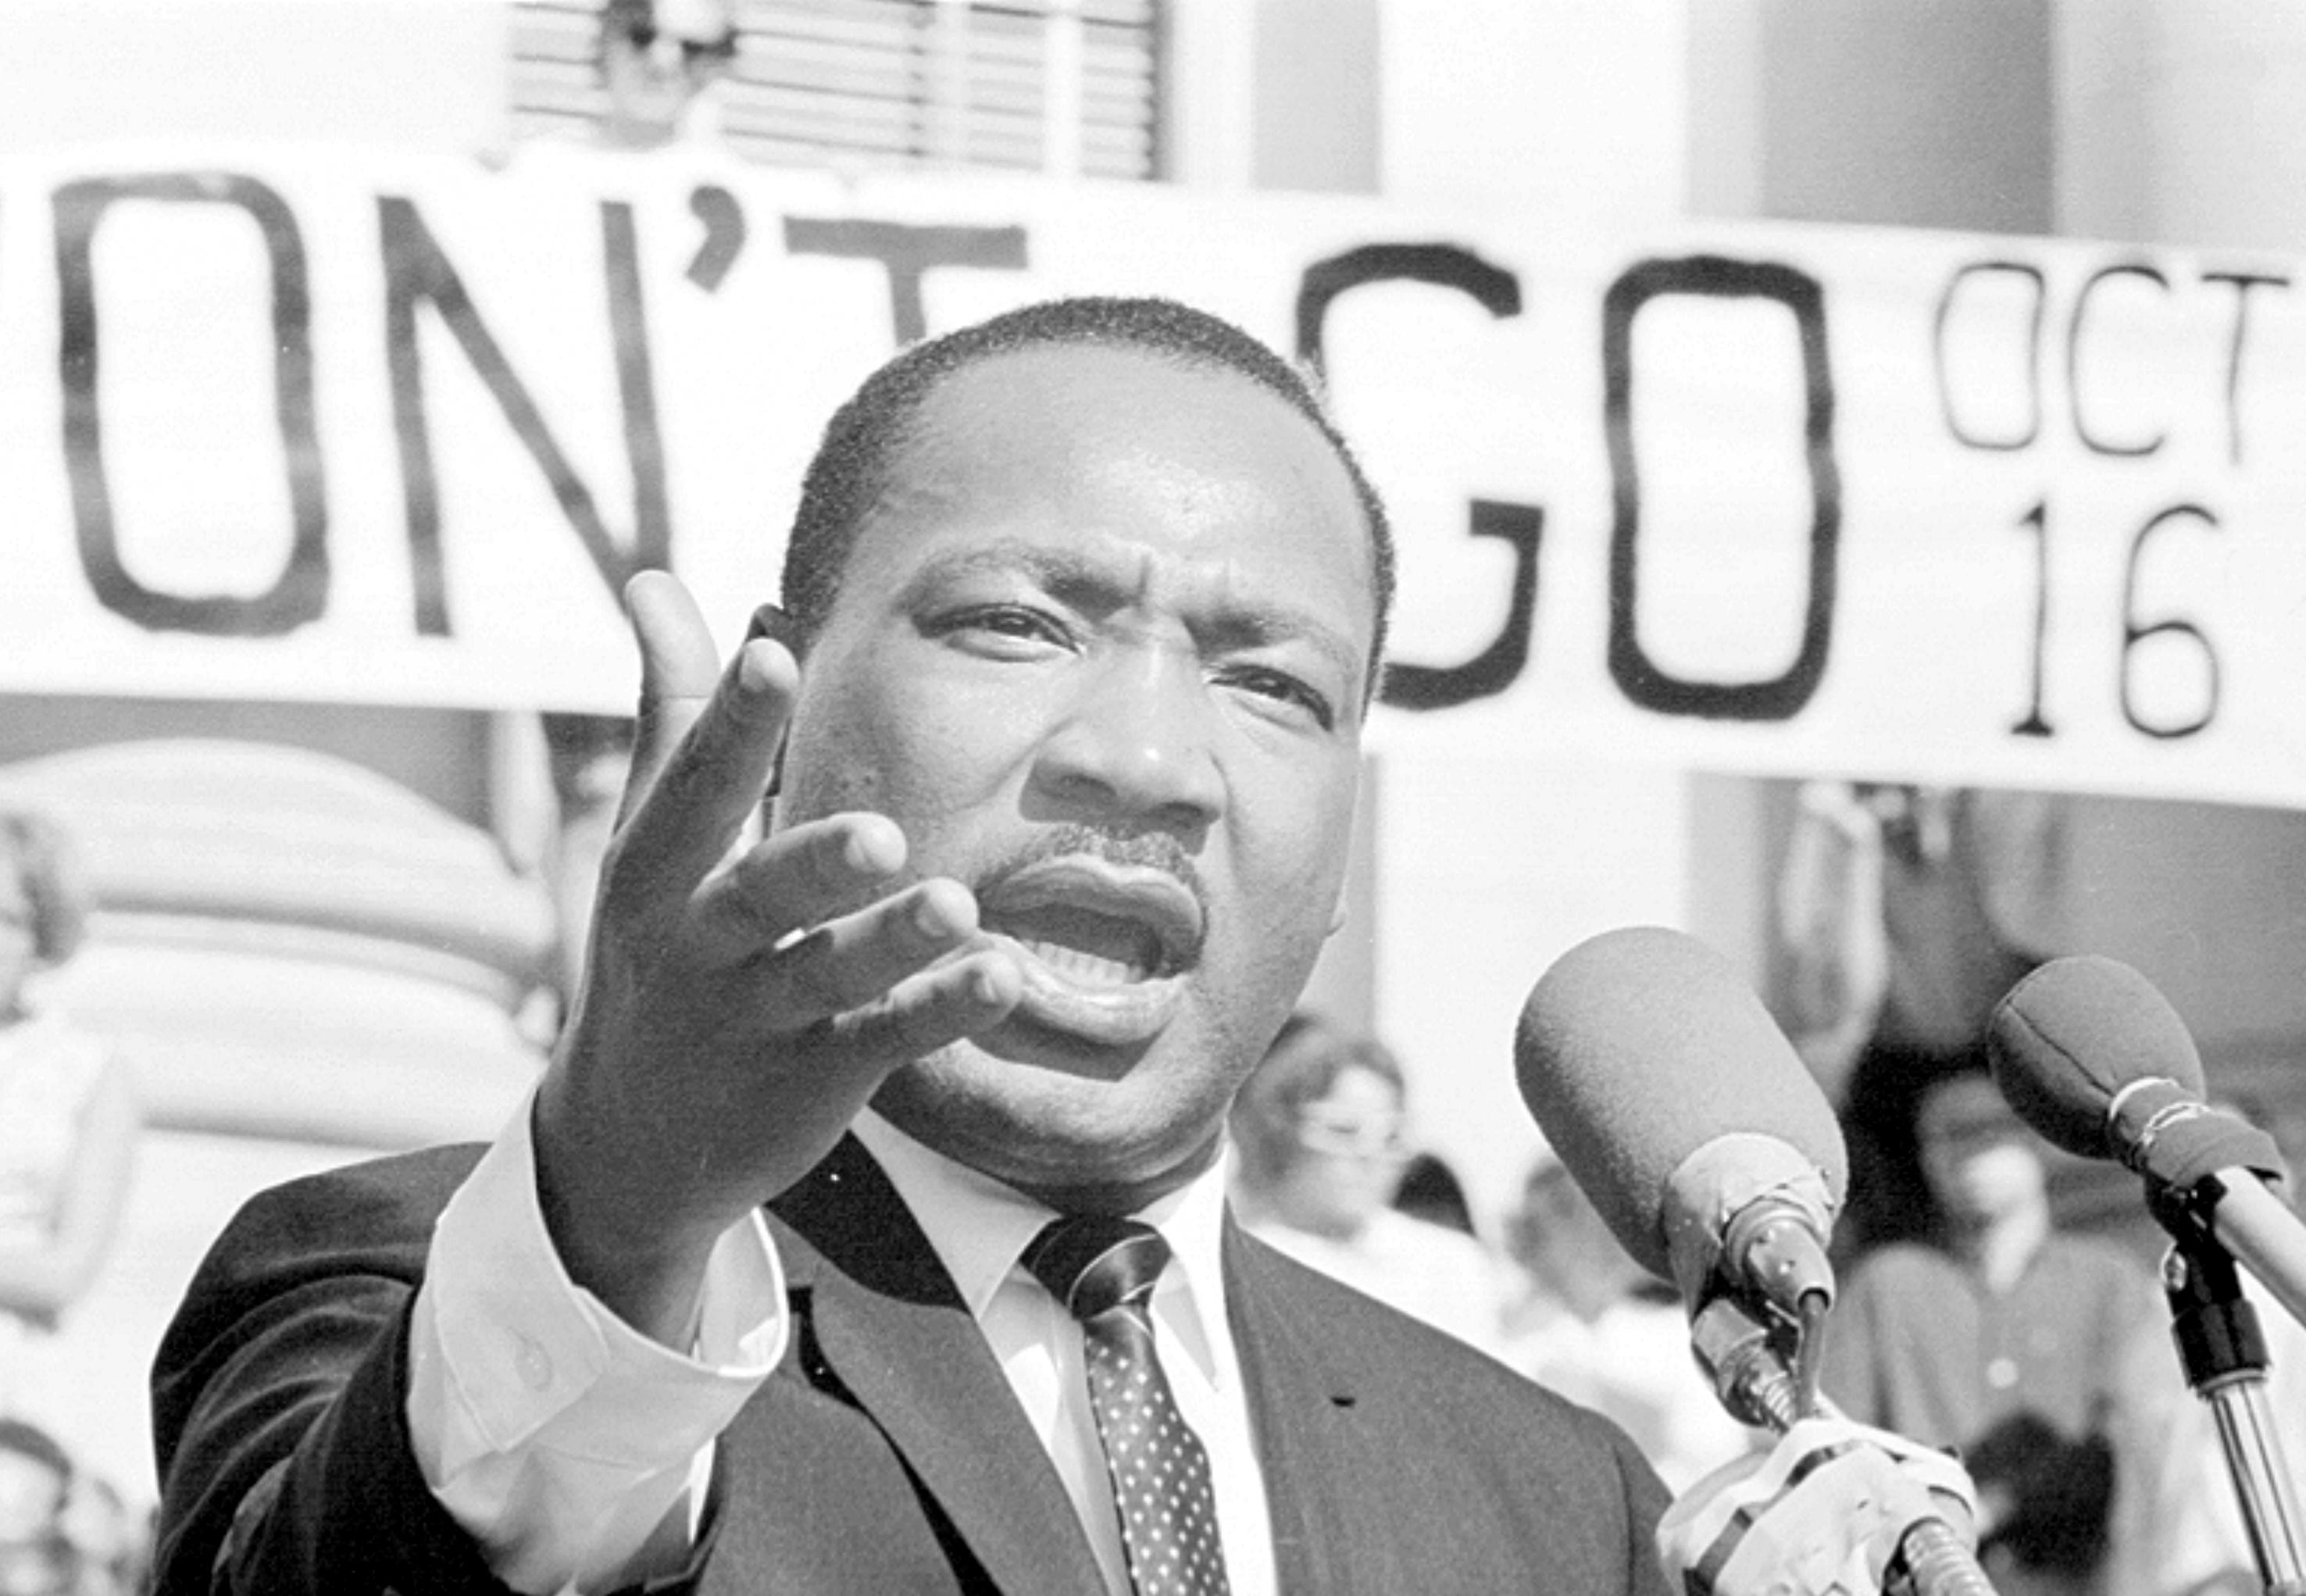 literary devices in martin luther king's speech